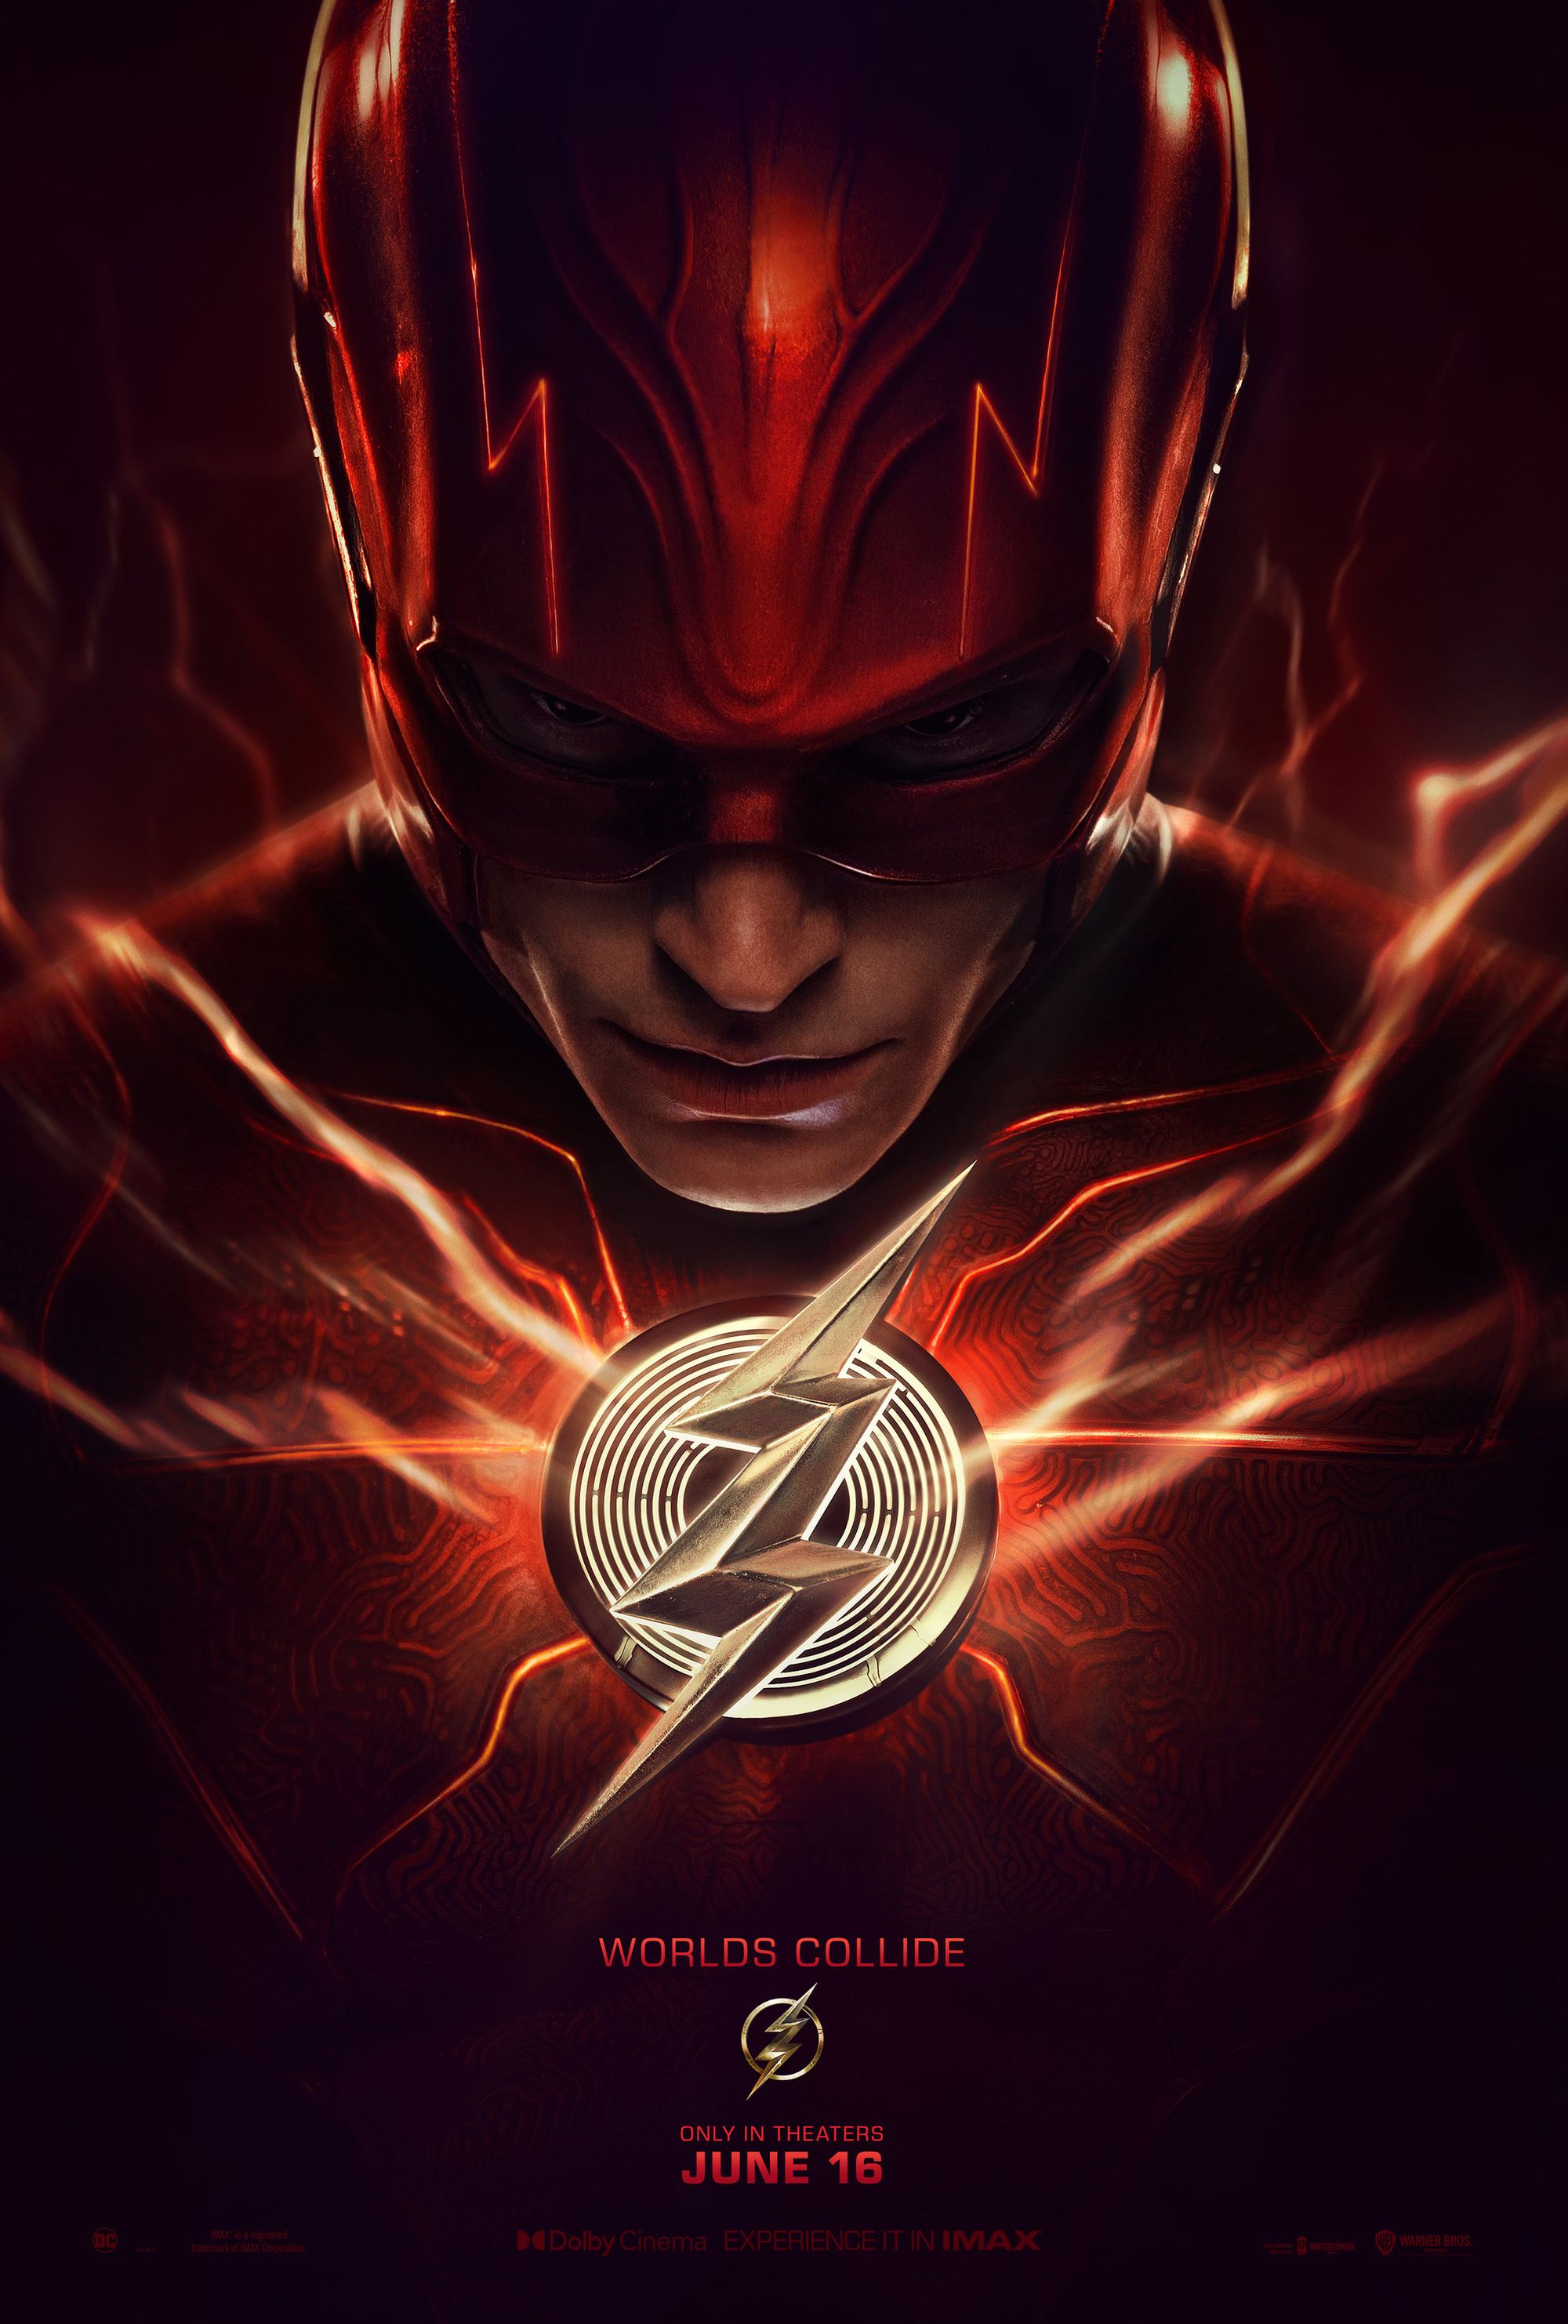 The movie poster for The Flash